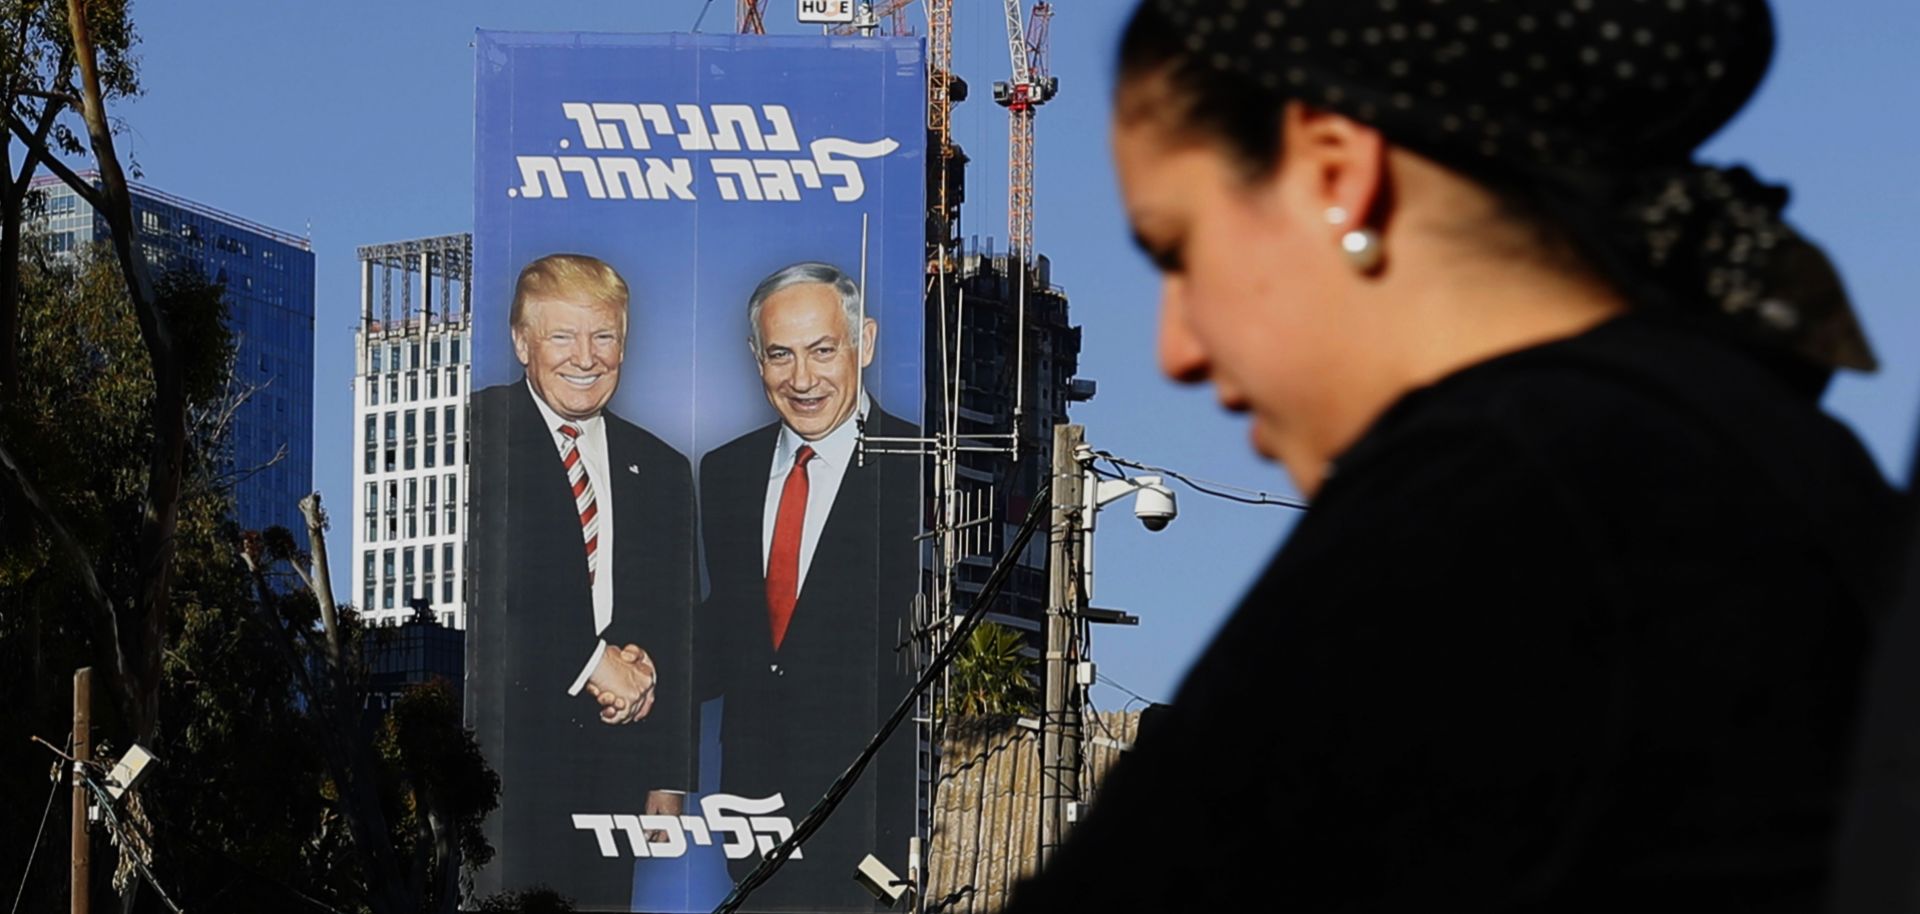 An election billboard in Tel Aviv on Feb. 3, 2019, shows Israeli Prime Minister Benjamin Netanyahu and U.S. President Donald Trump shaking hands. The Hebrew writing reads, "Netanyahu, in another league."